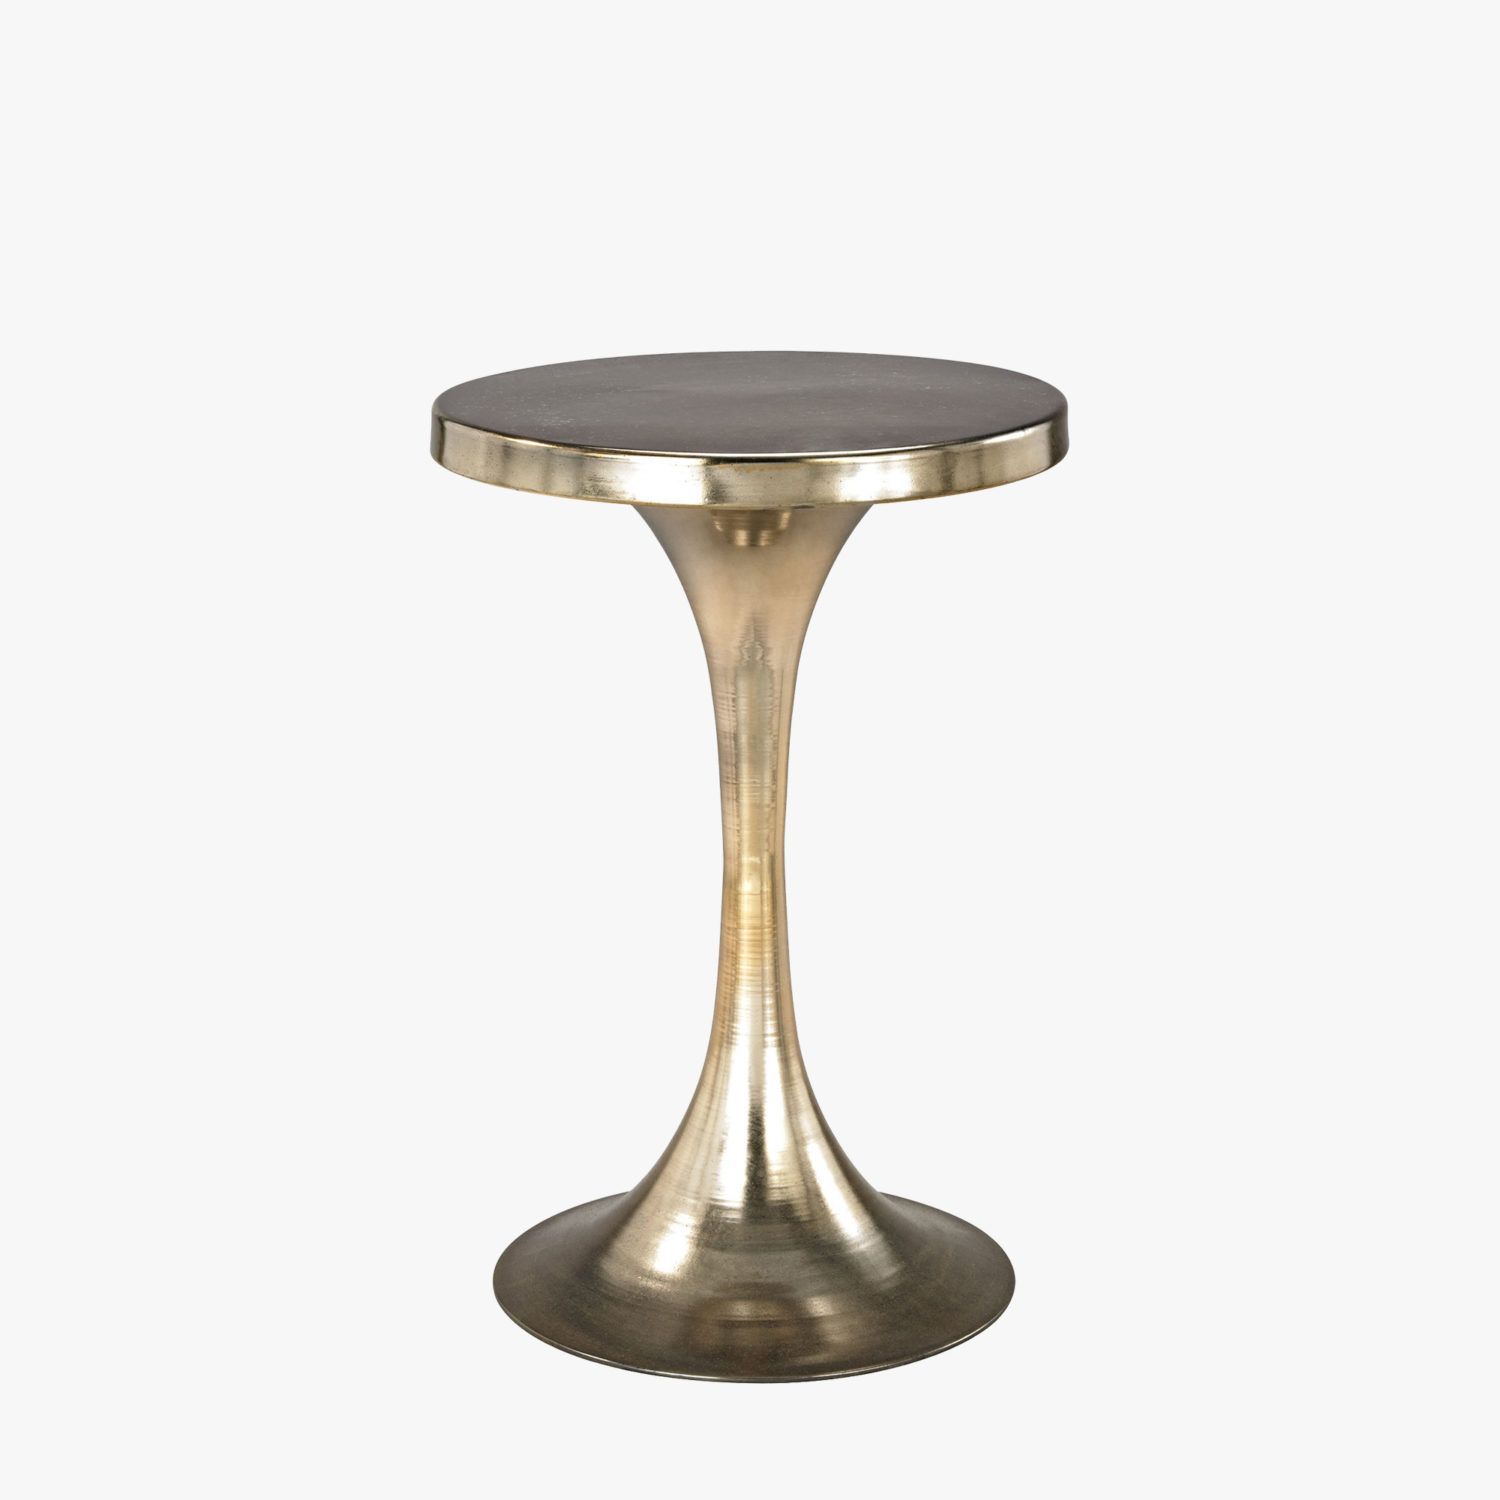 antique gold pedestal accent table tables coffee side small our the perfect perch for cocktail this makes quite statement glass lamps pier one target west elm white desk hallway